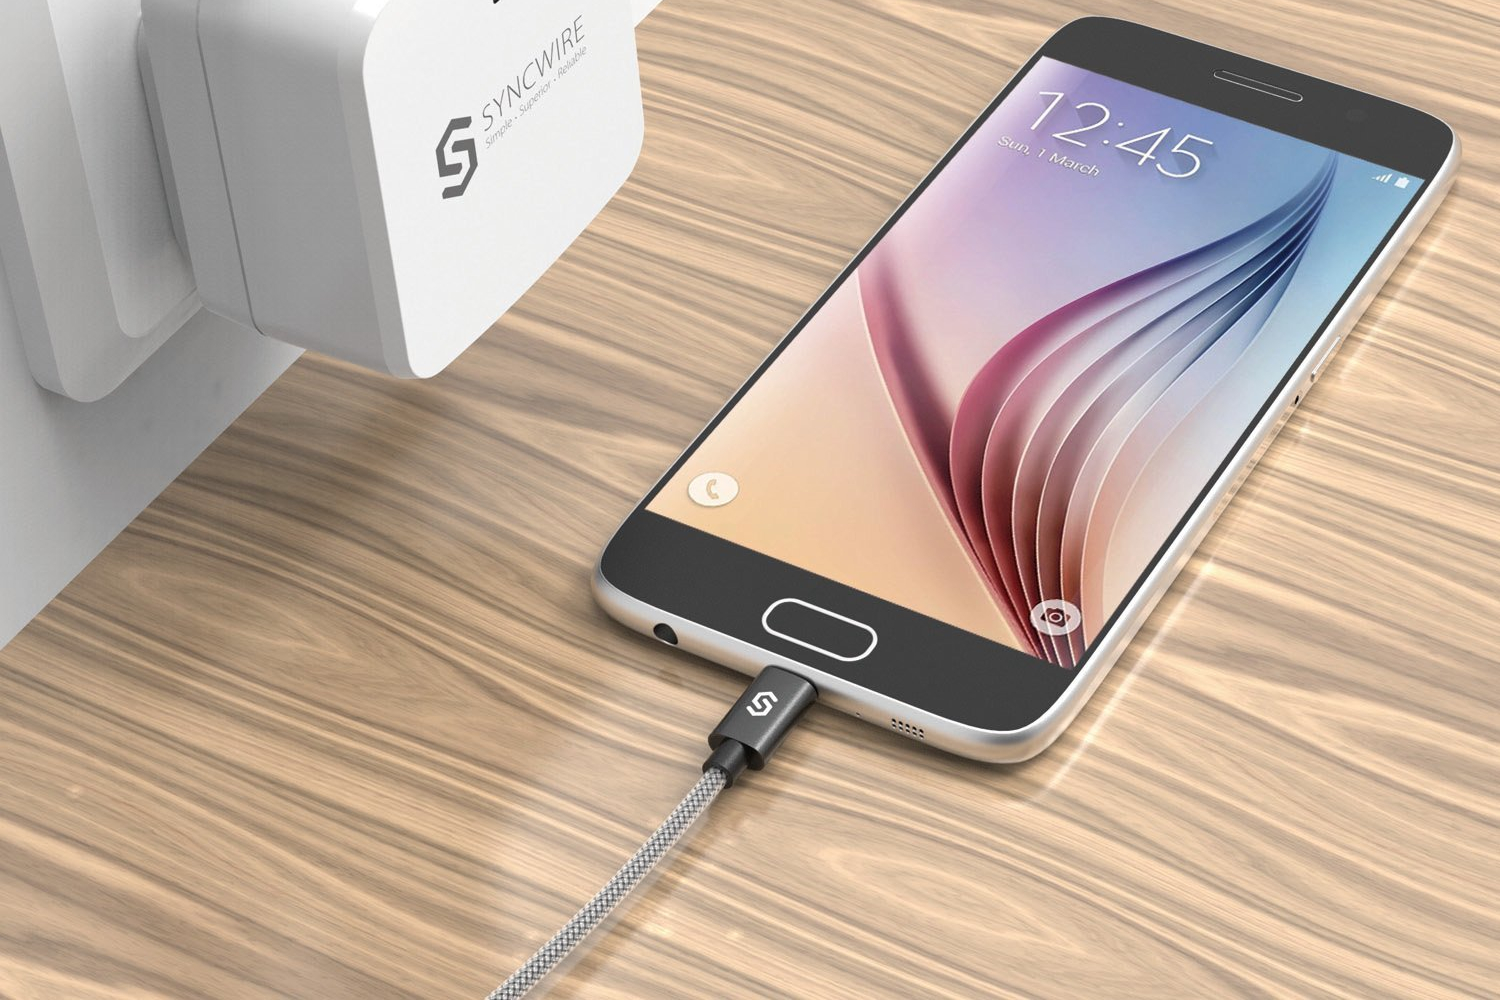 Syncwire Micro USB cable plugged into a smartphone next to a charging plug.